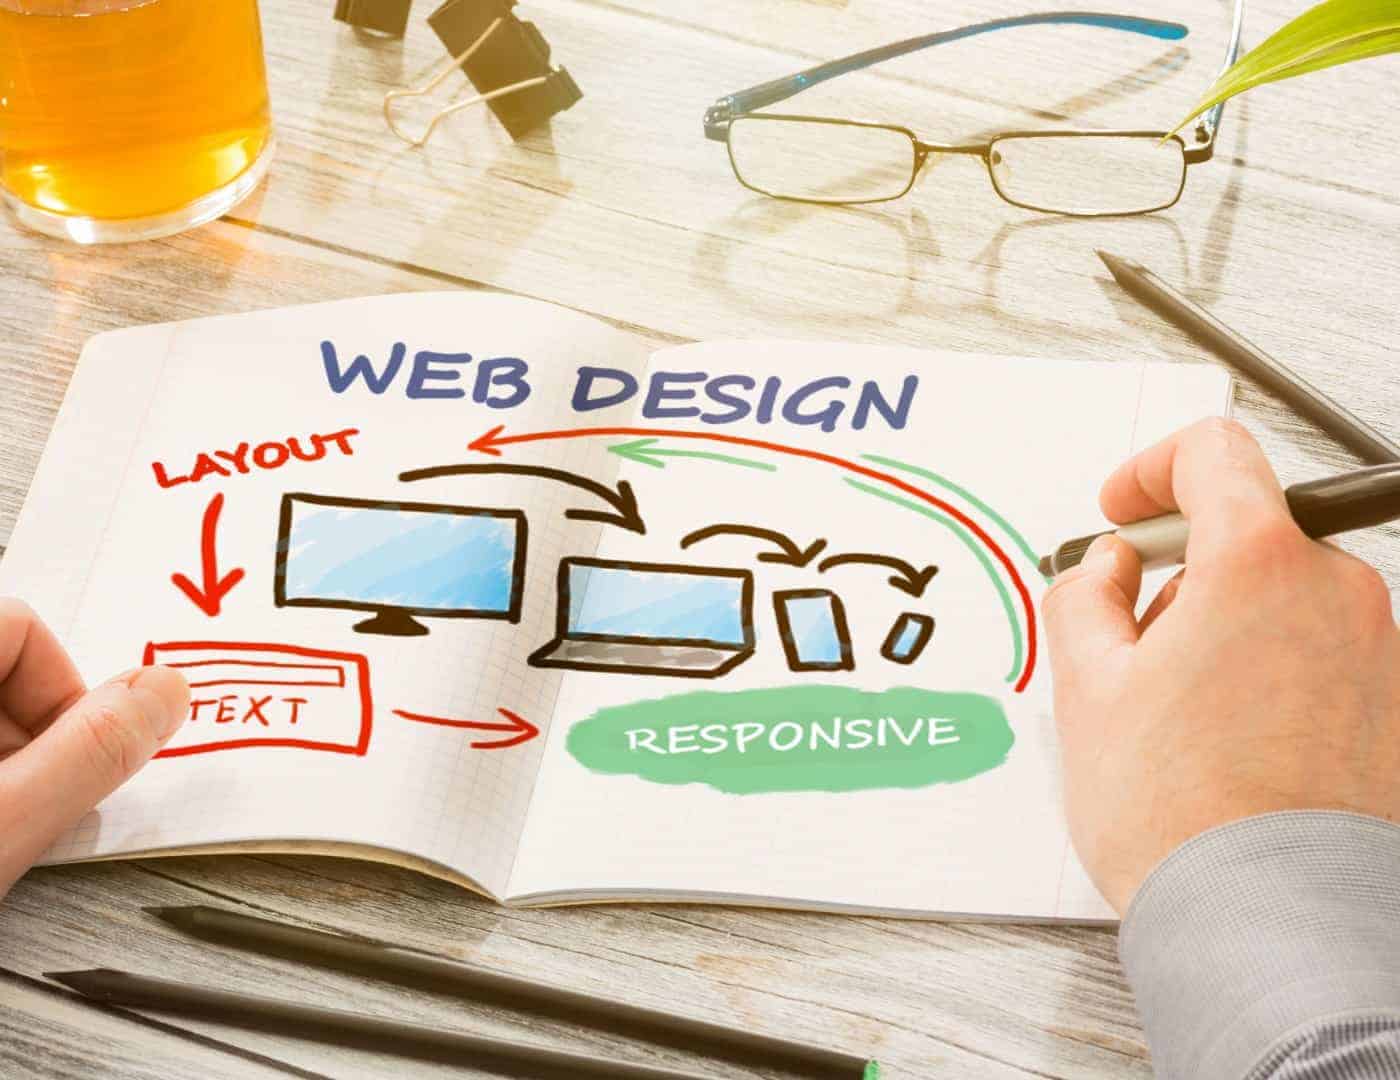 Can an Existing Website be Made Responsive or is a Rebuild a Better Option?